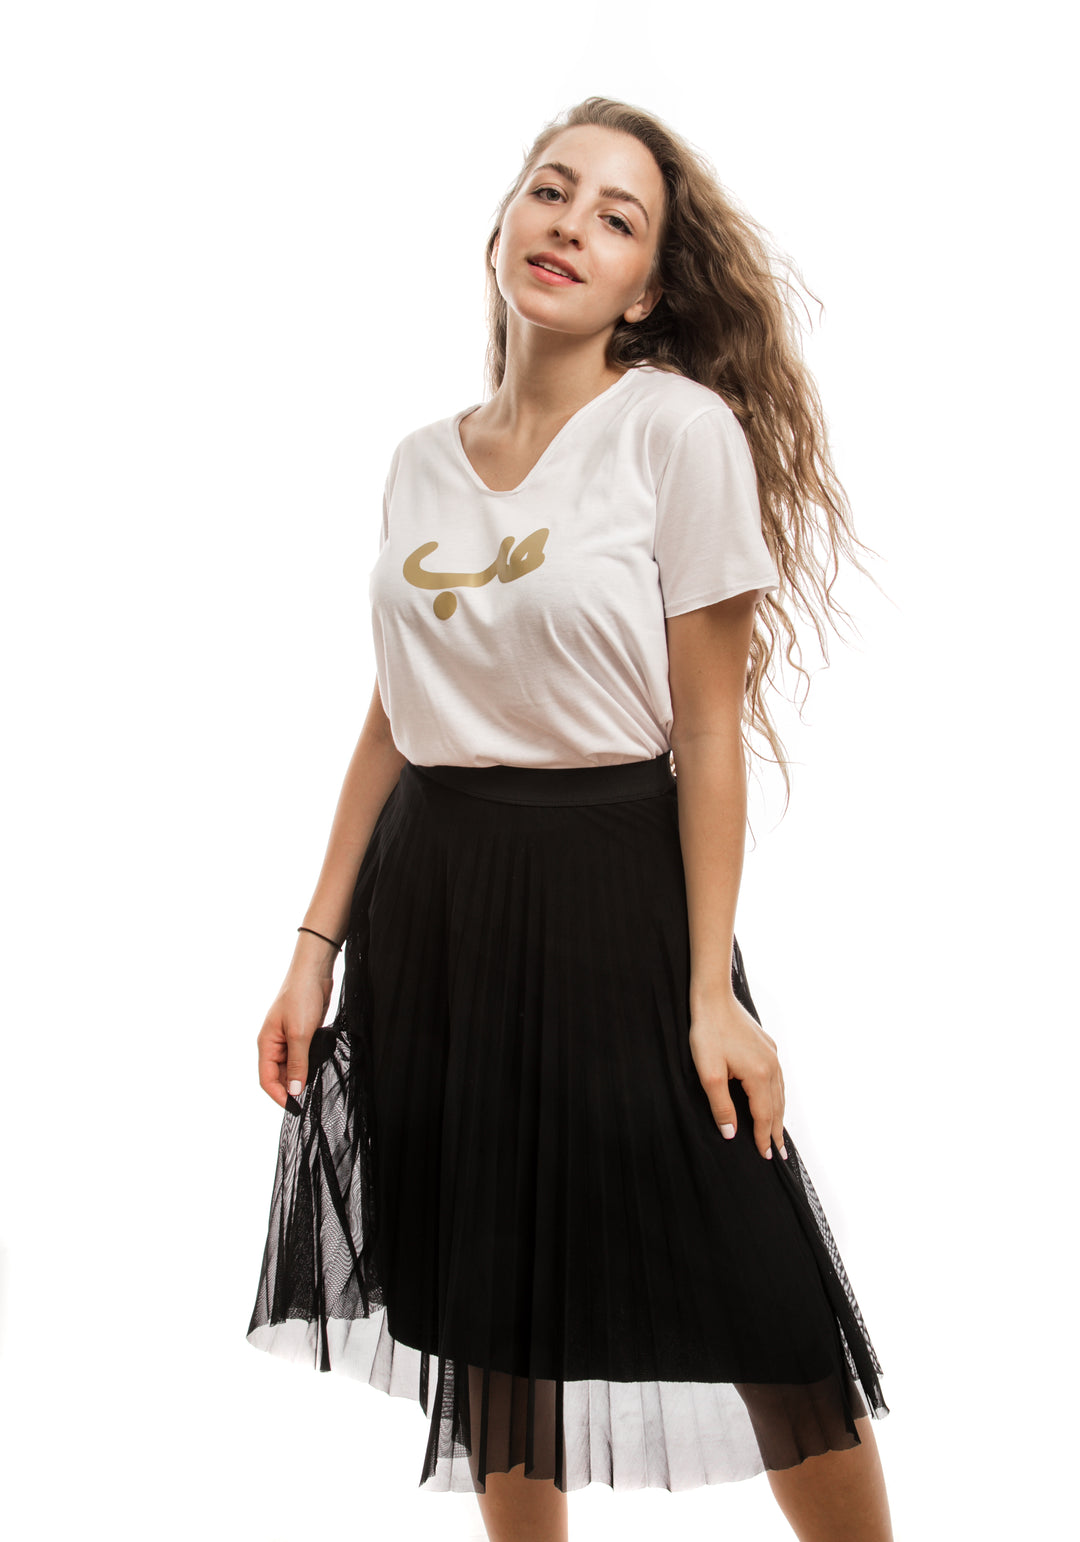 Young adult female wearing white T-shirt with Hobb written in Arabic حب and printed in gold silkscreen in the center of the T-shirt along a black skirt.